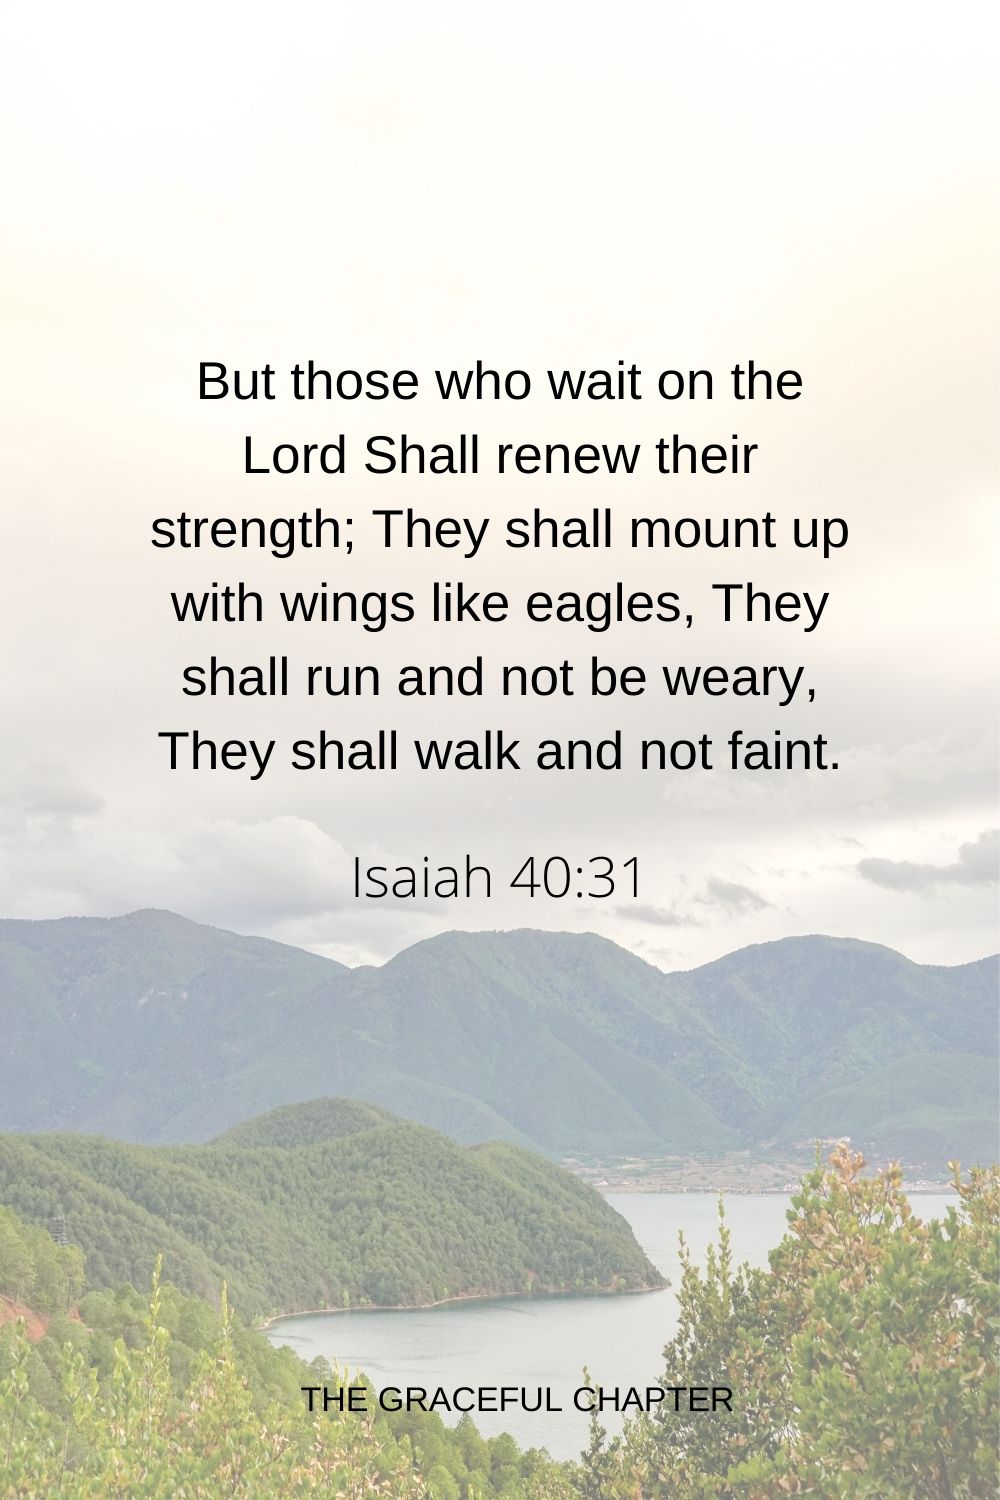 But those who wait on the Lord Shall renew their strength; They shall mount up with wings like eagles, They shall run and not be weary, They shall walk and not faint. Isaiah 40:31